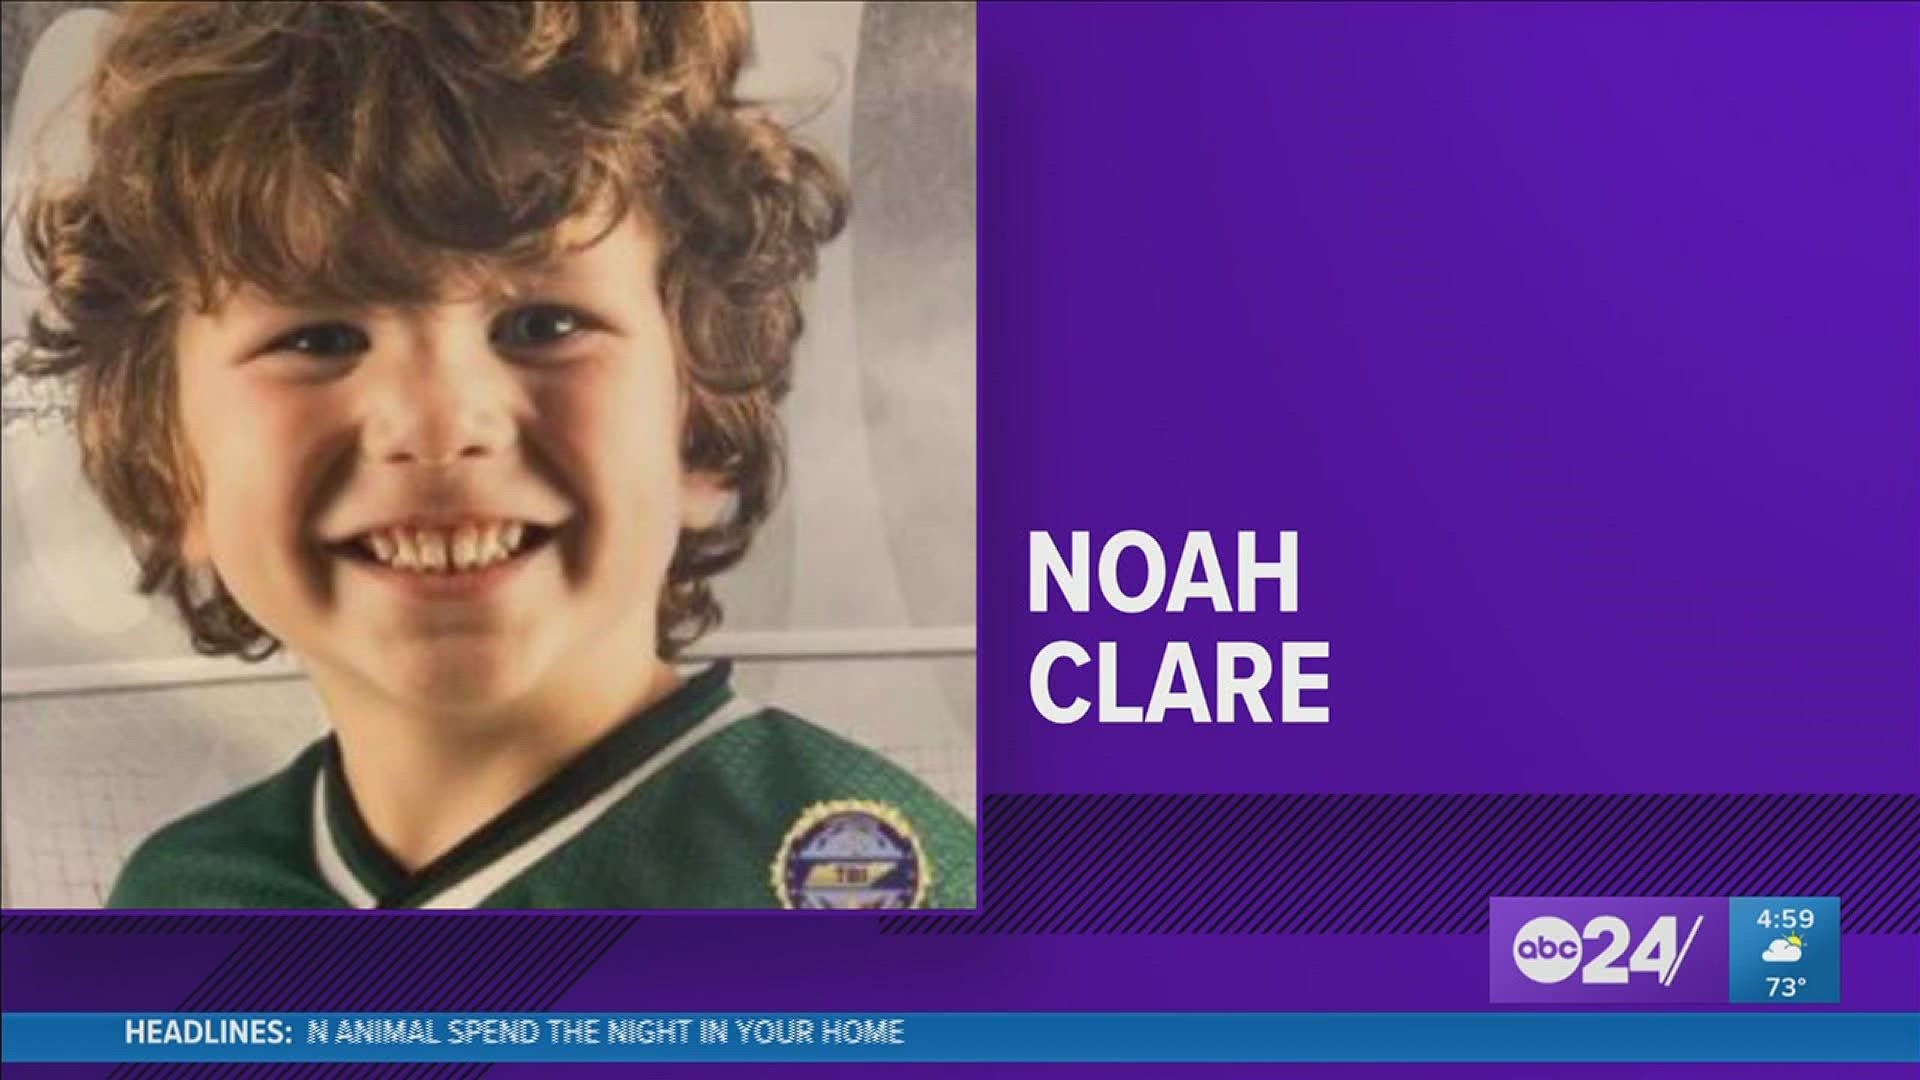 3-year-old Noah Clare has been missing from Gallatin, Tennessee, in Sumner County since November 6, 2021, and may be with 35-year-old Jacob Clare.